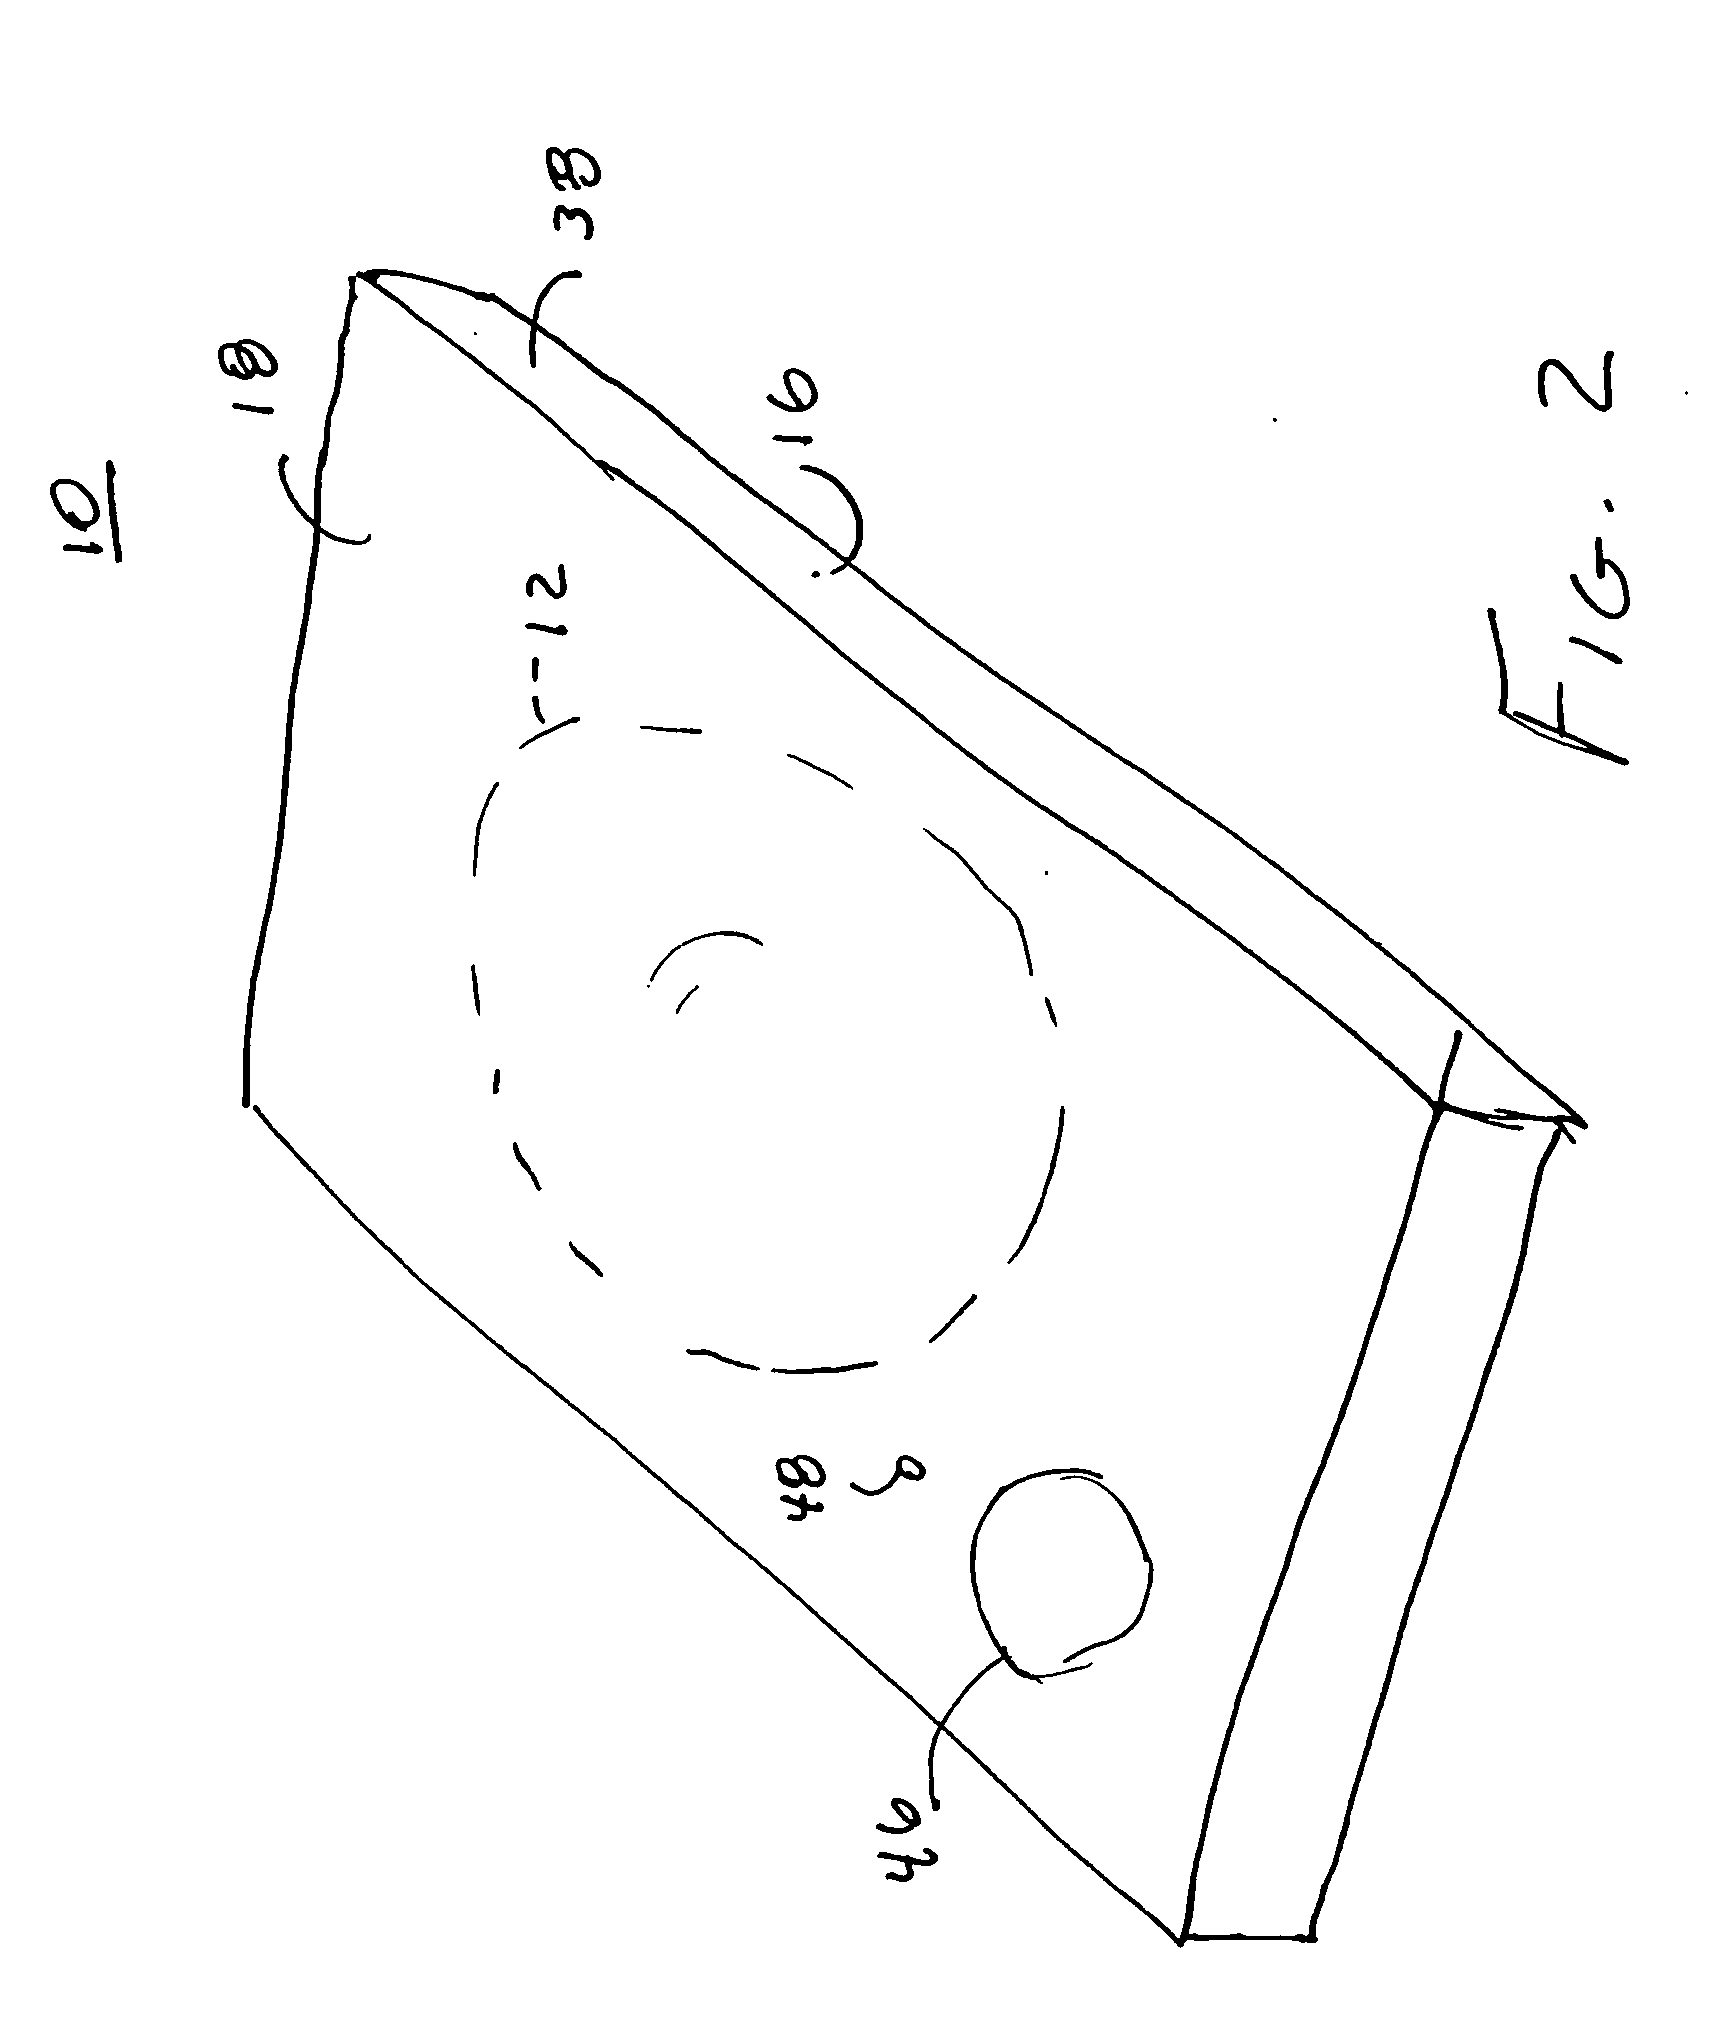 Protective housing assembly, and associated method, for optical storage media